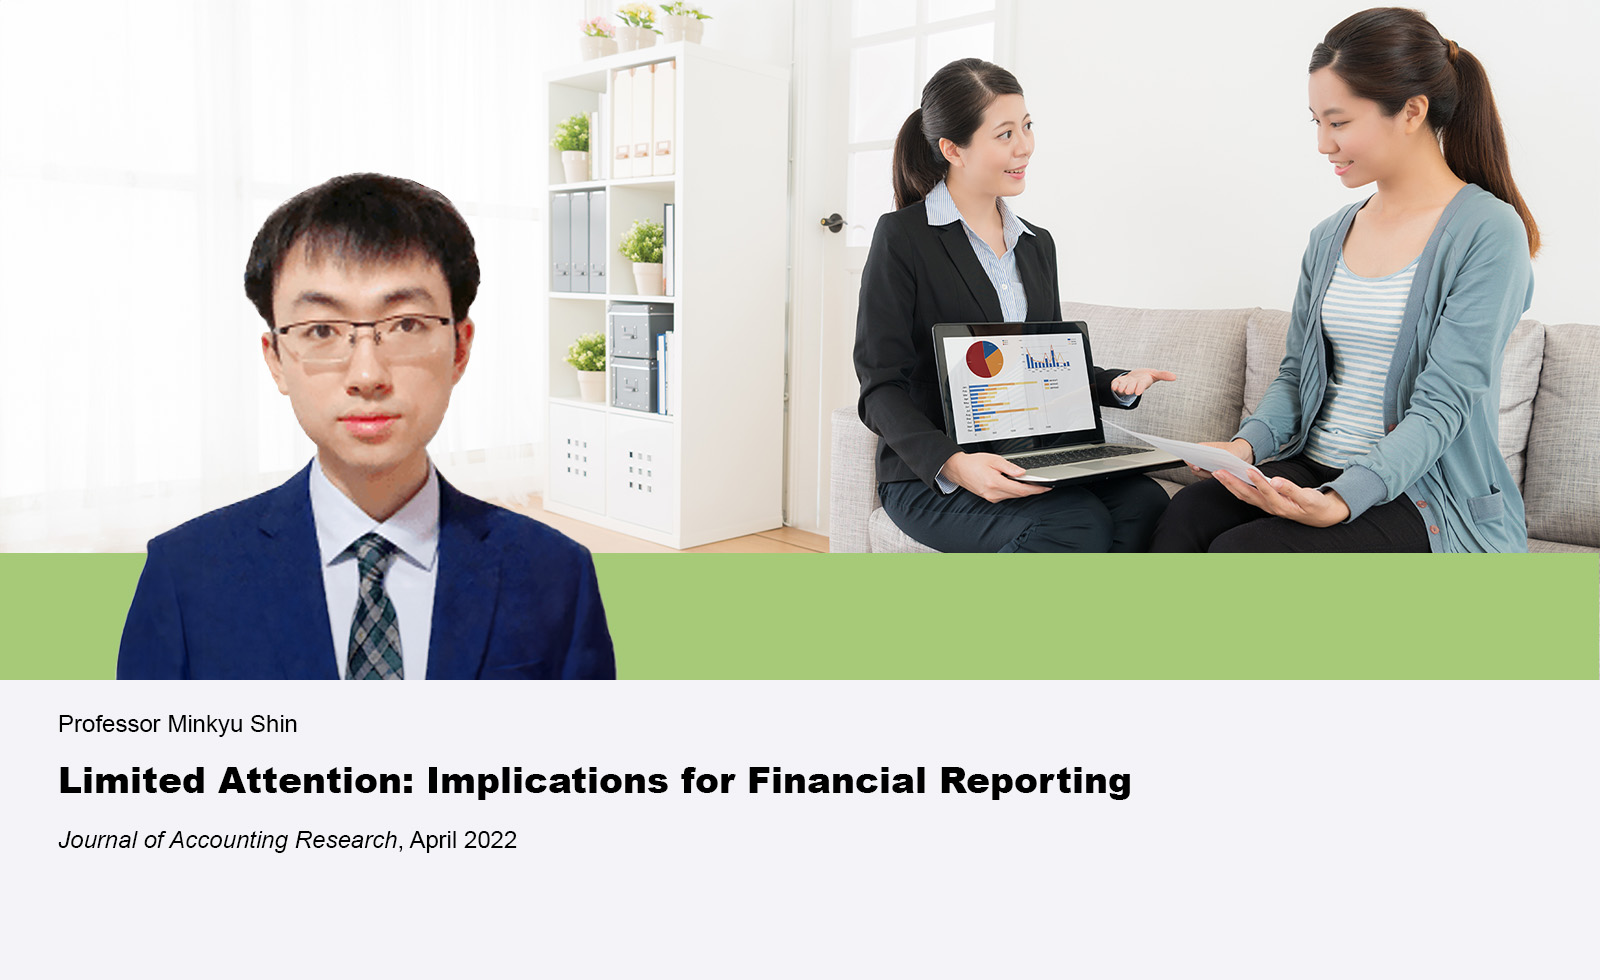 Limited Attention: Implications for Financial Reporting